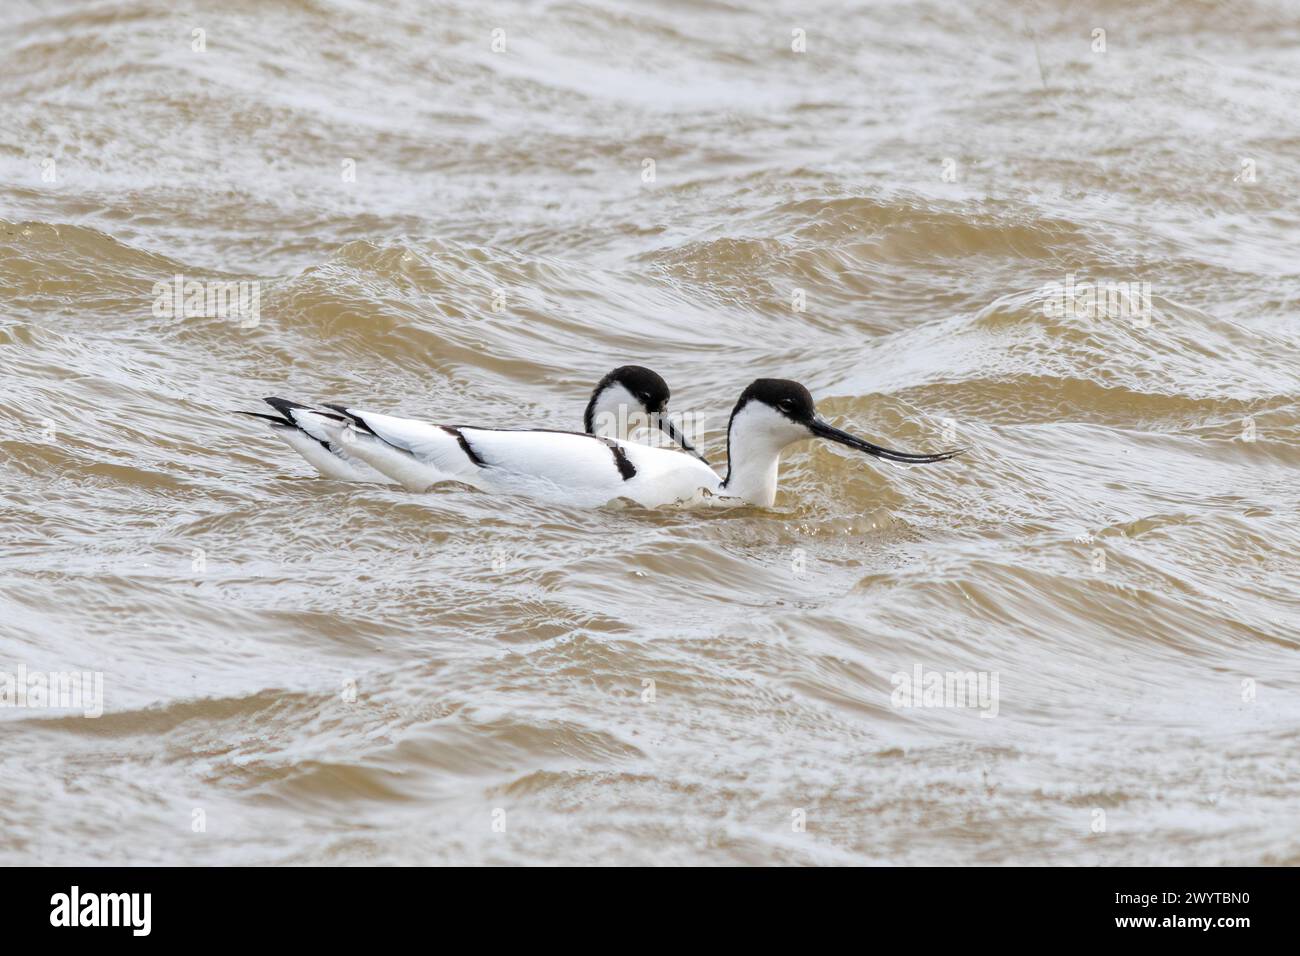 Avocets (Recurvirostra avosetta), a pair of the black and white wading birds in water, Kent, England, UK Stock Photo